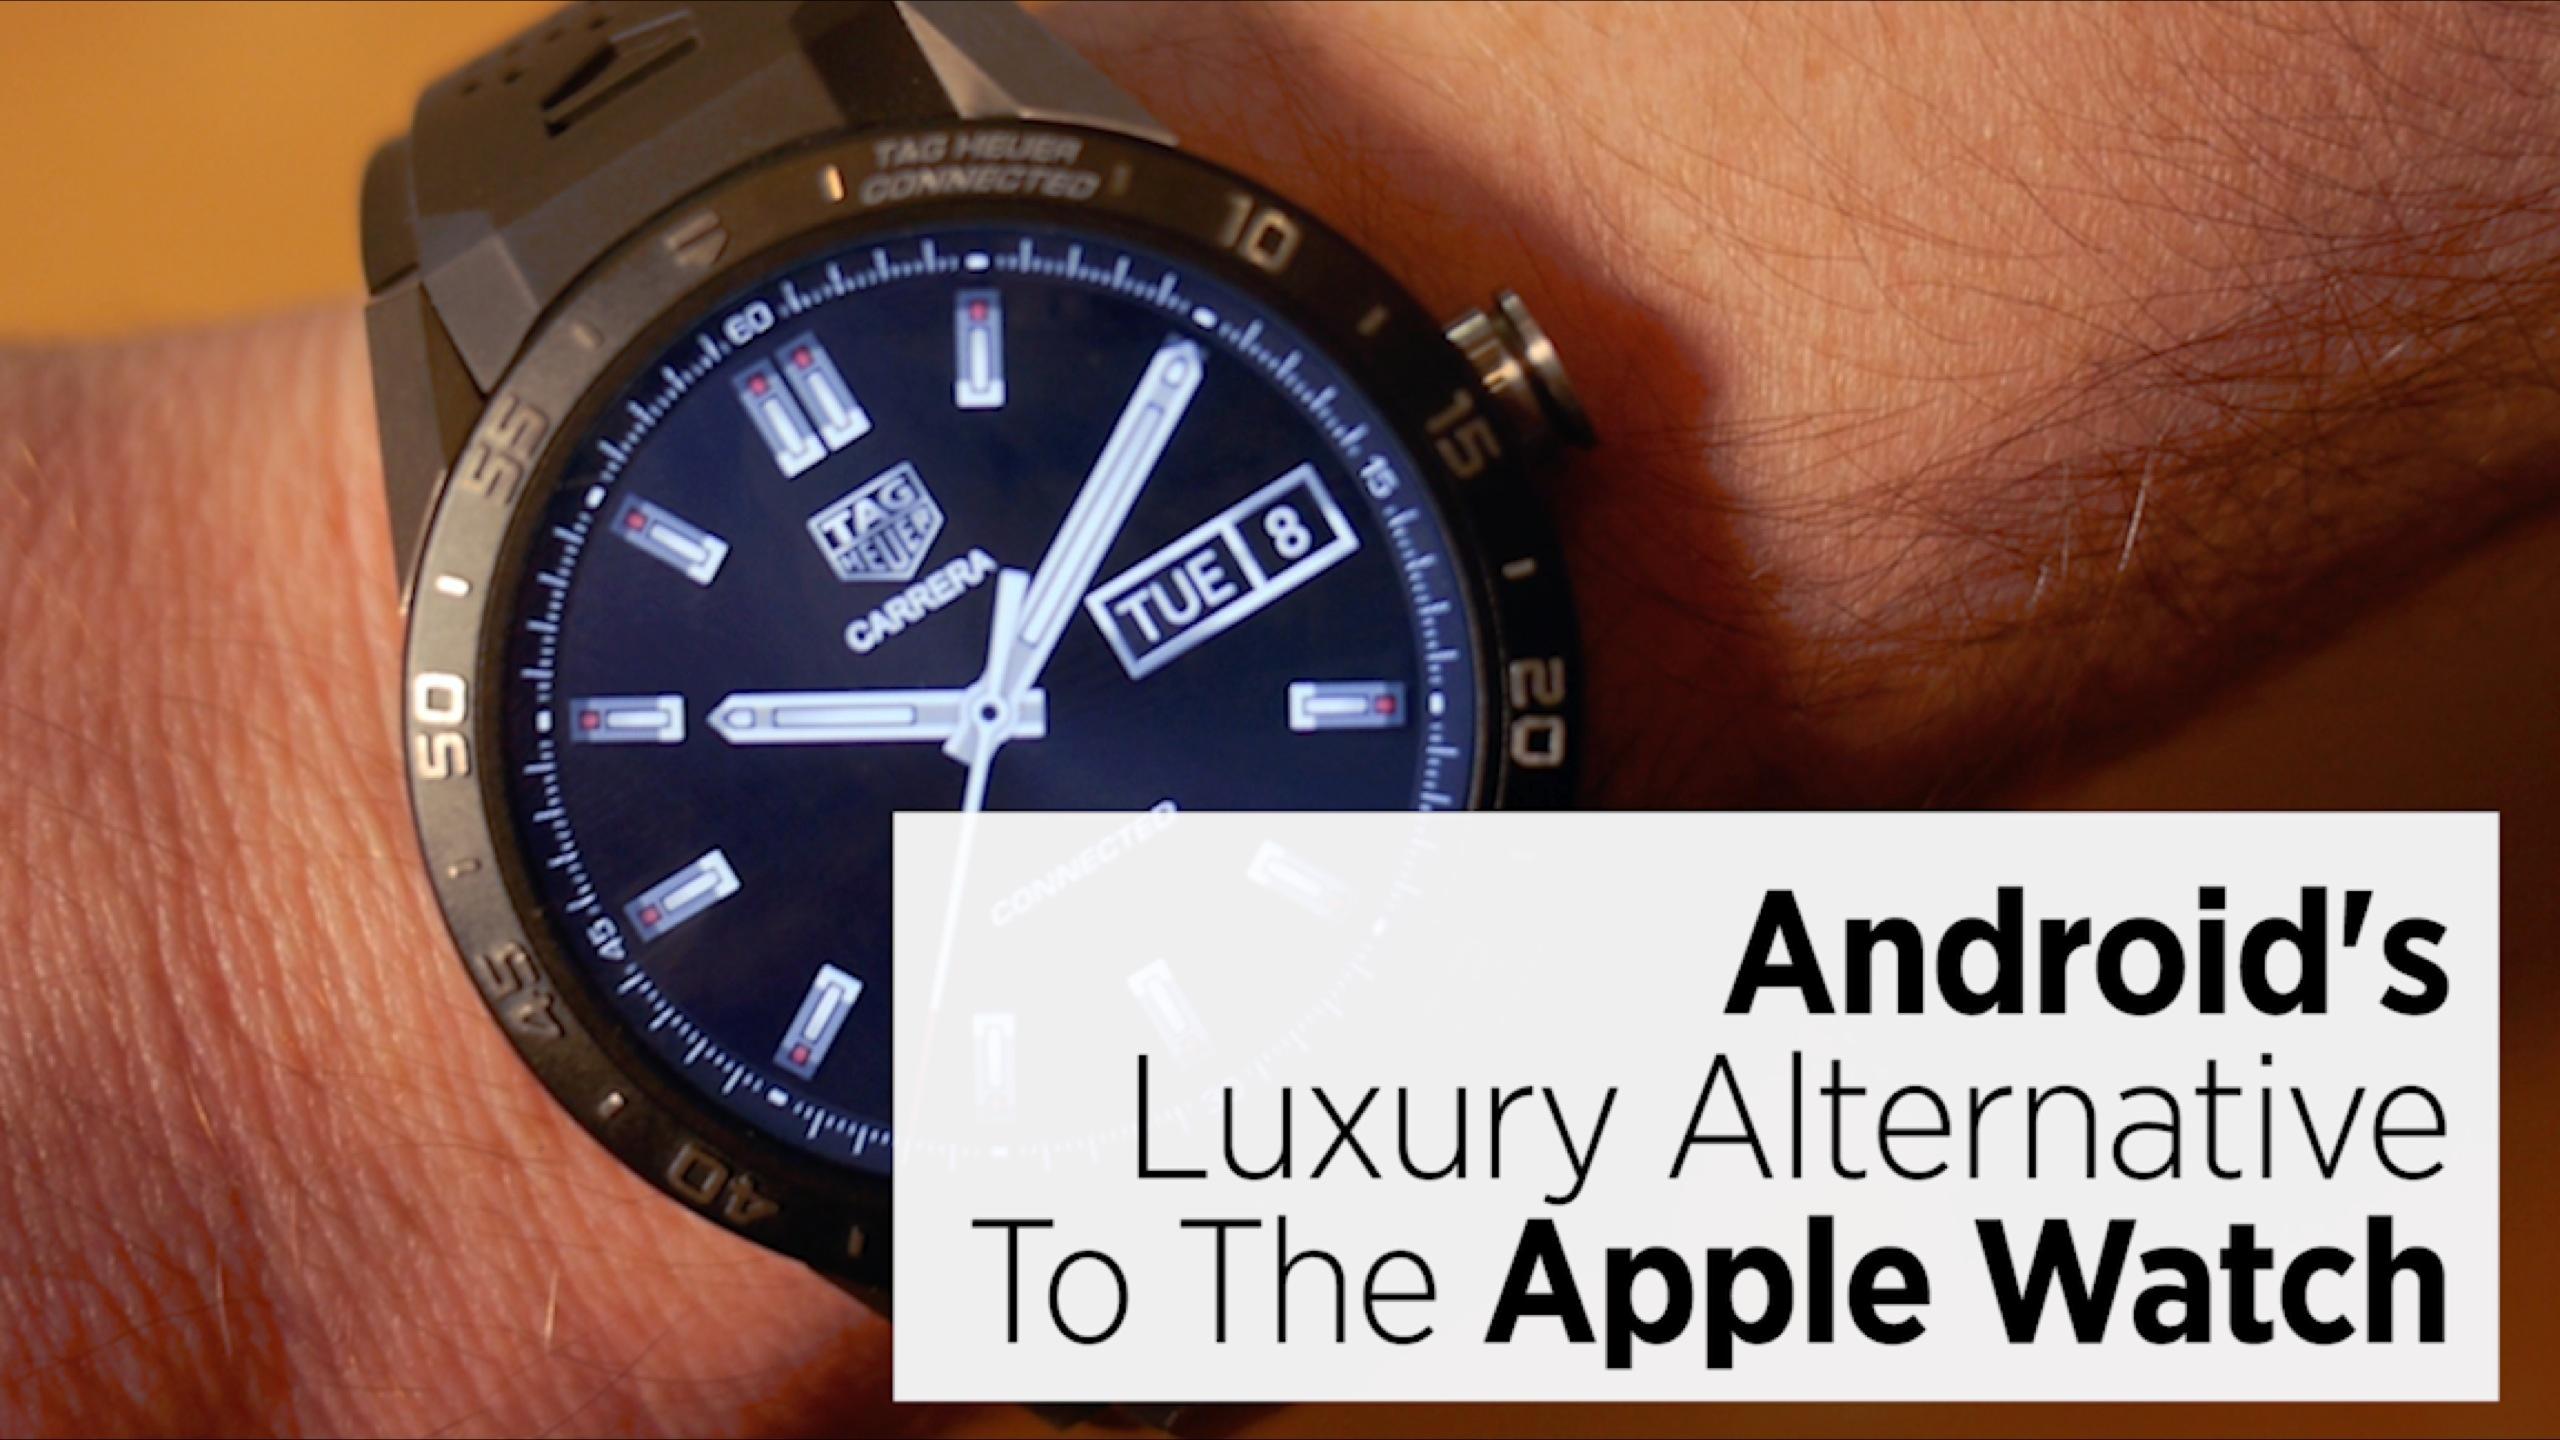 Android's Luxury Alternative To The Apple Watch